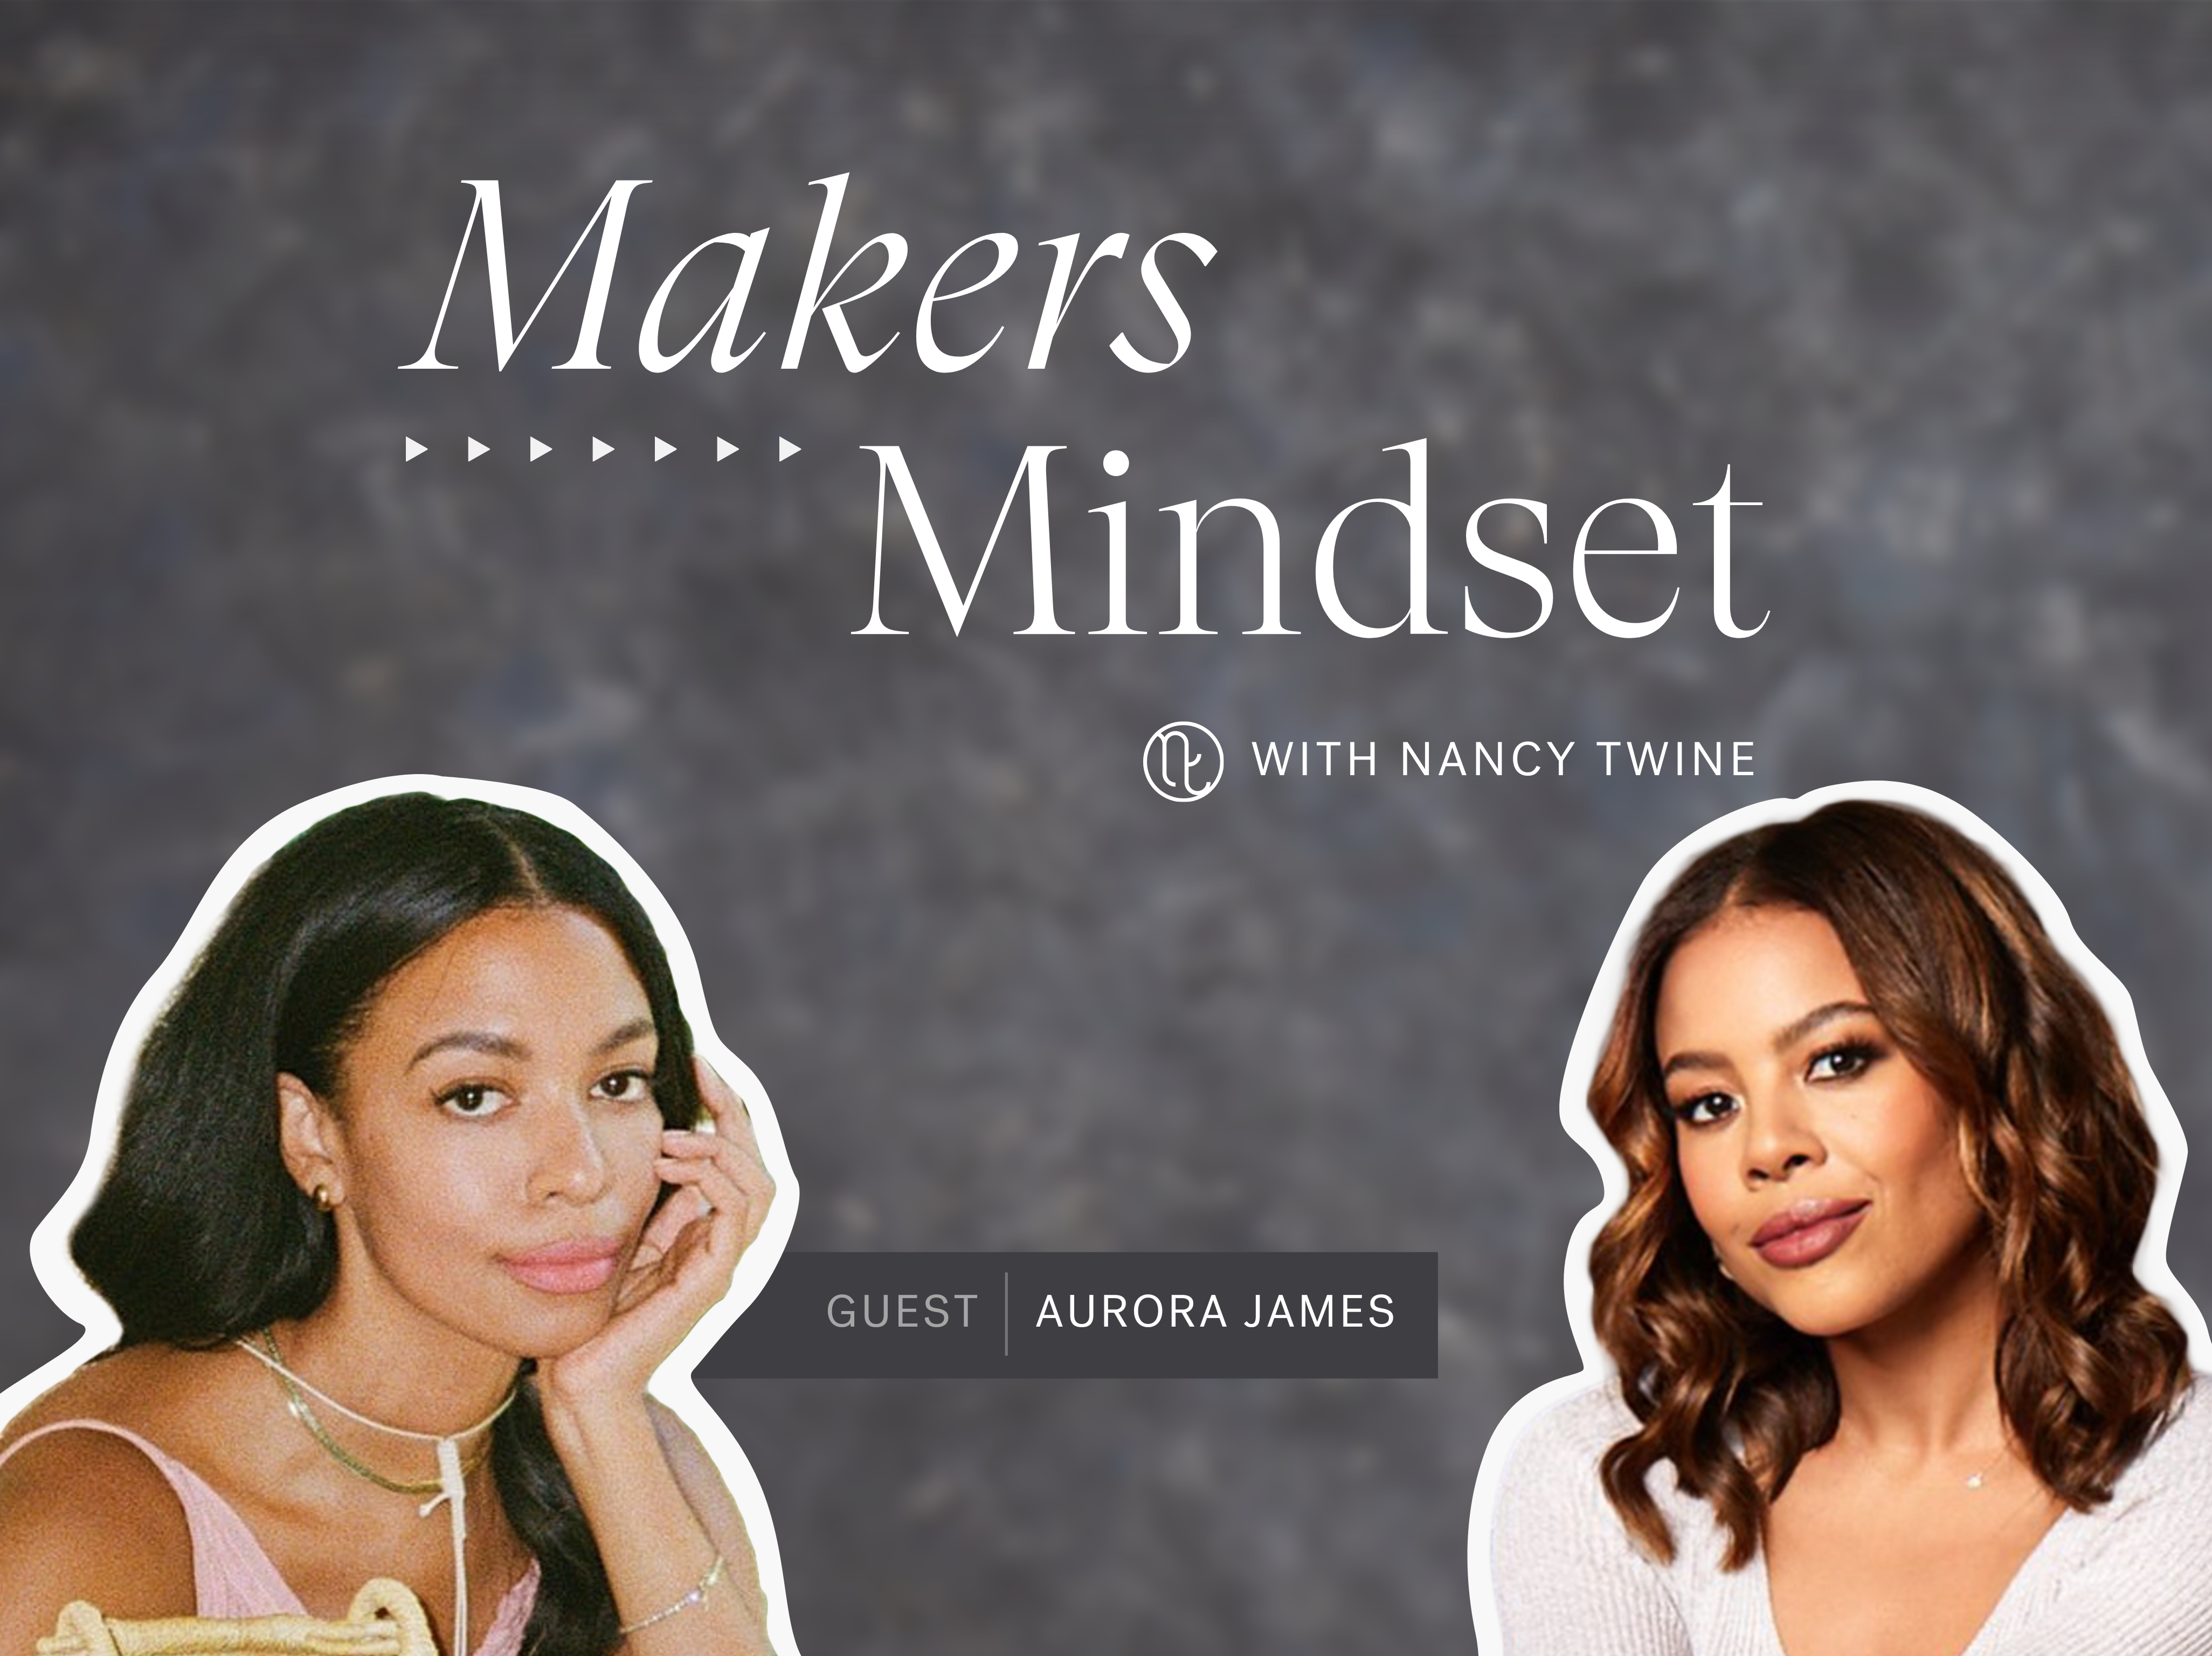 A cover image for the Makers Mindset podcast featuring Aurora James, the founder of Brother Vellies and the Fifteen Percent Pledge(left) with host Nancy Twine (right).